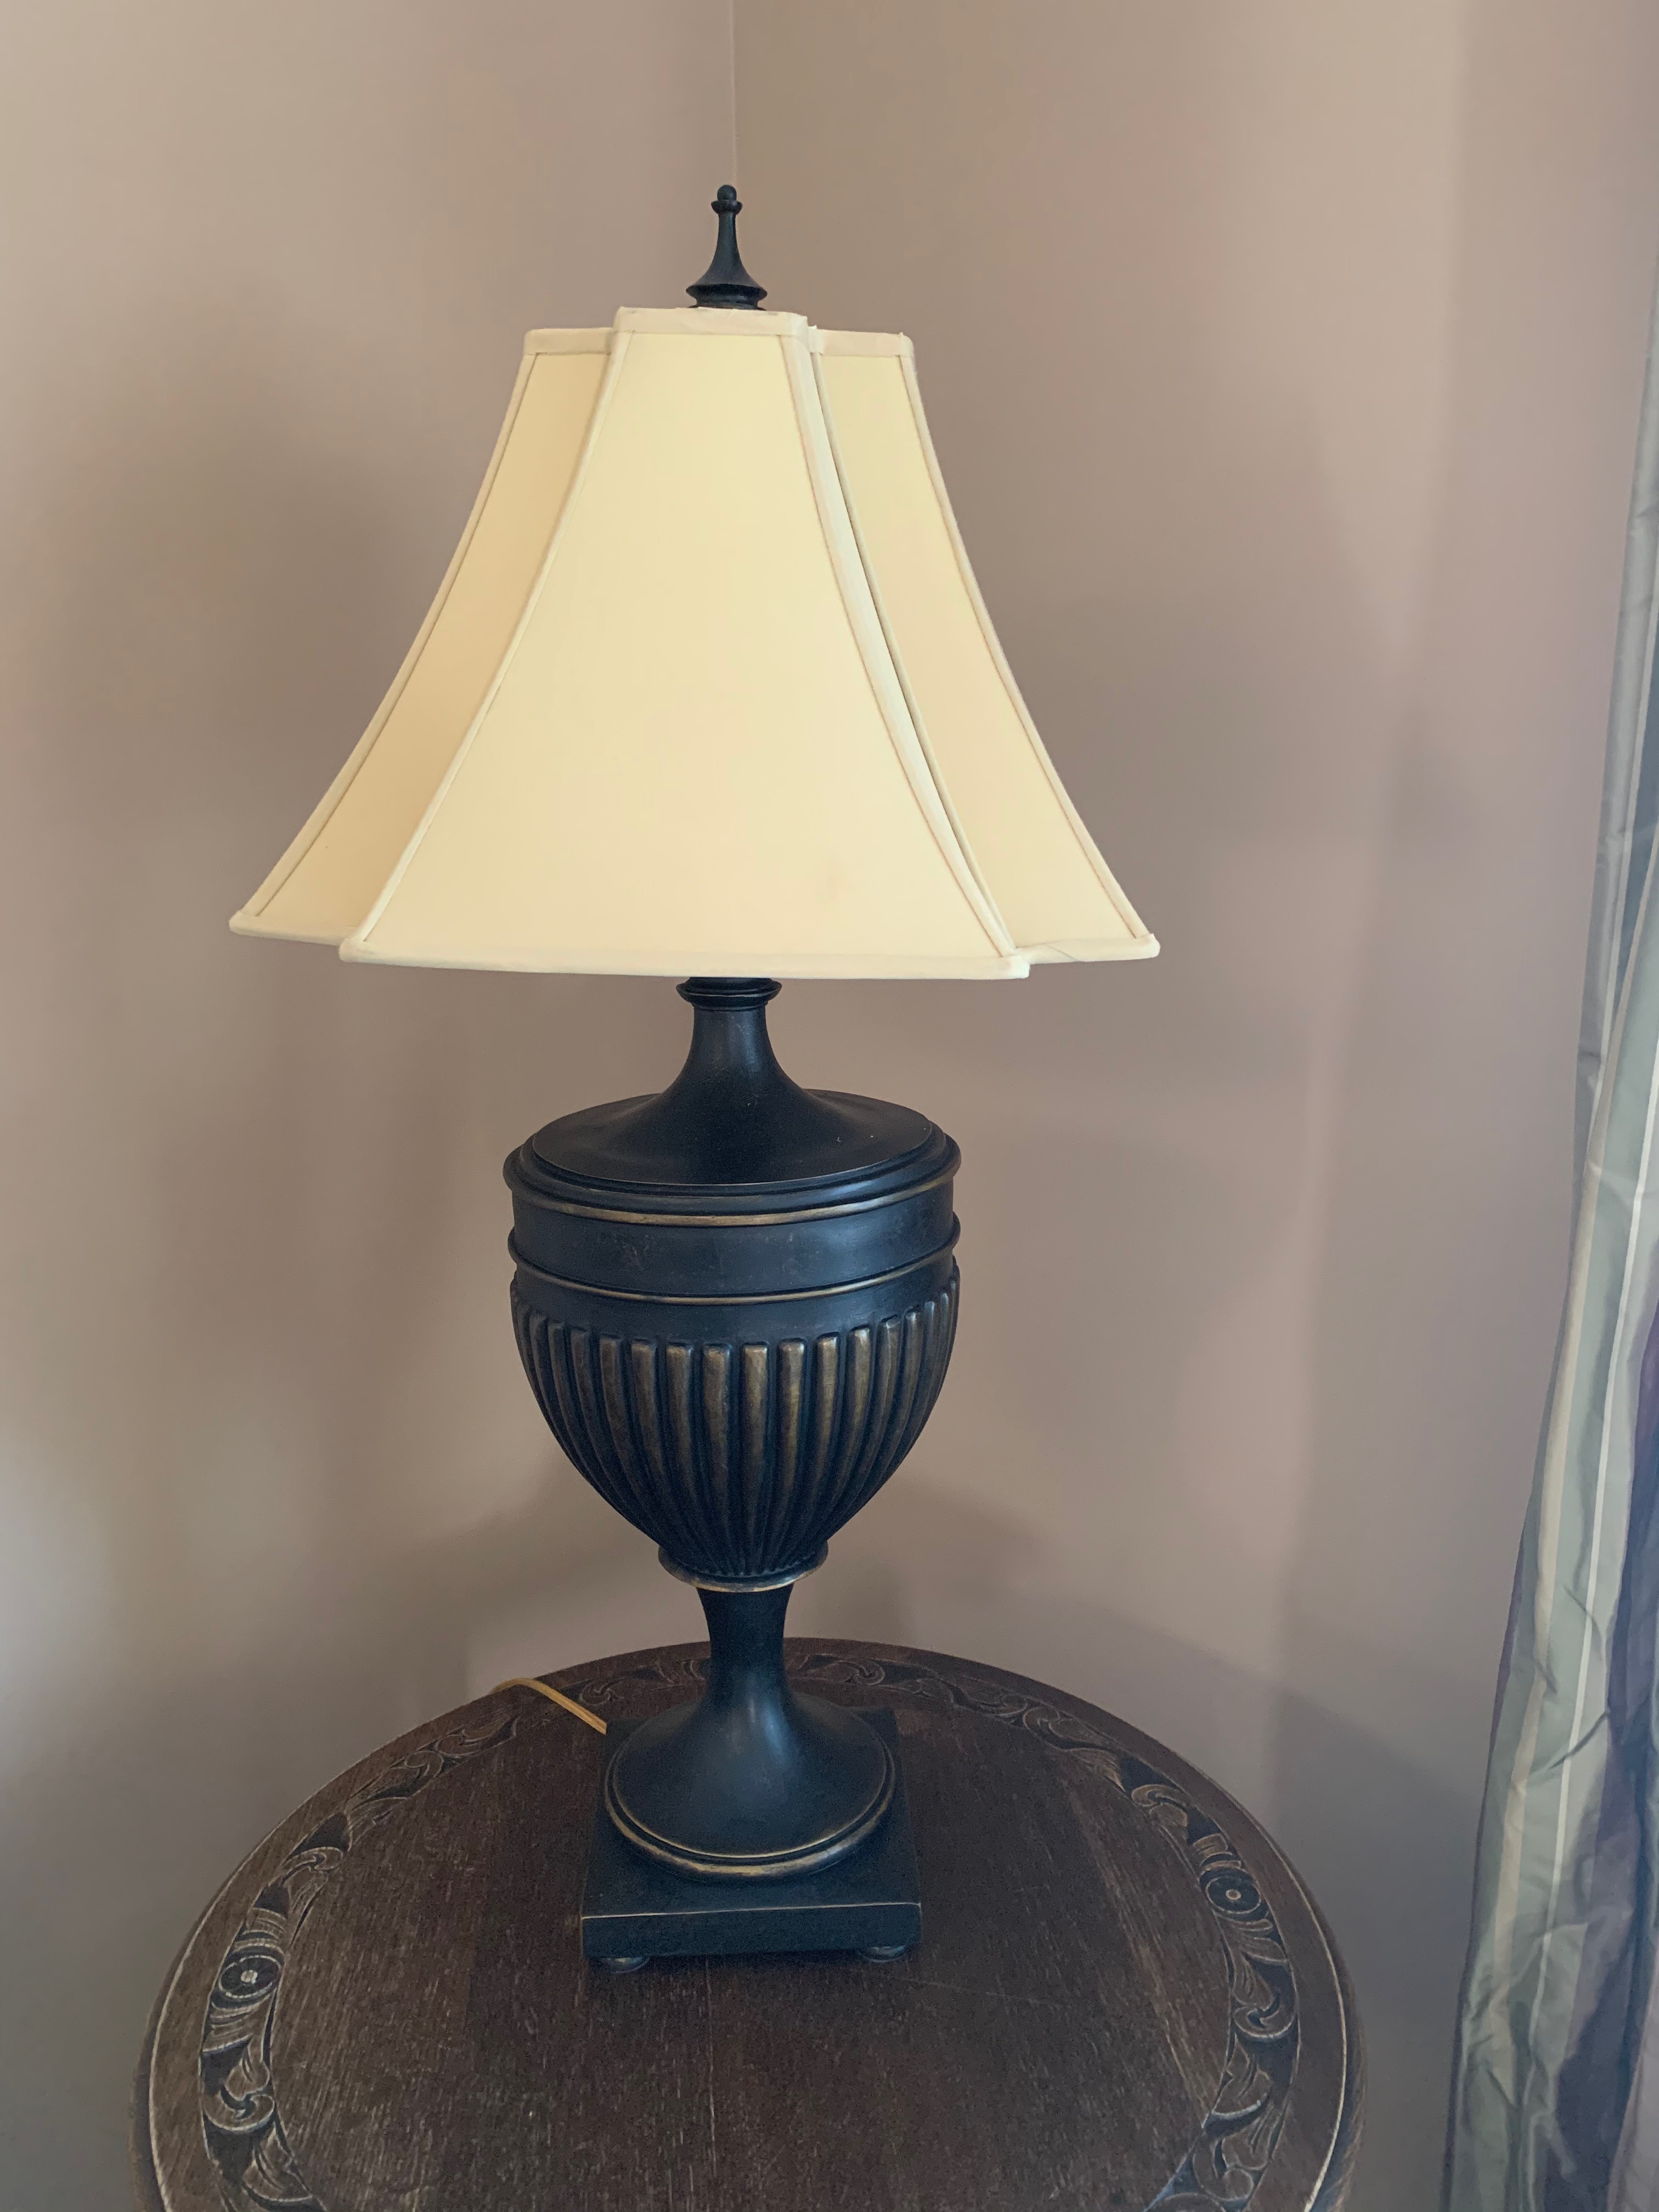 2 Brown matching lamps photo 1